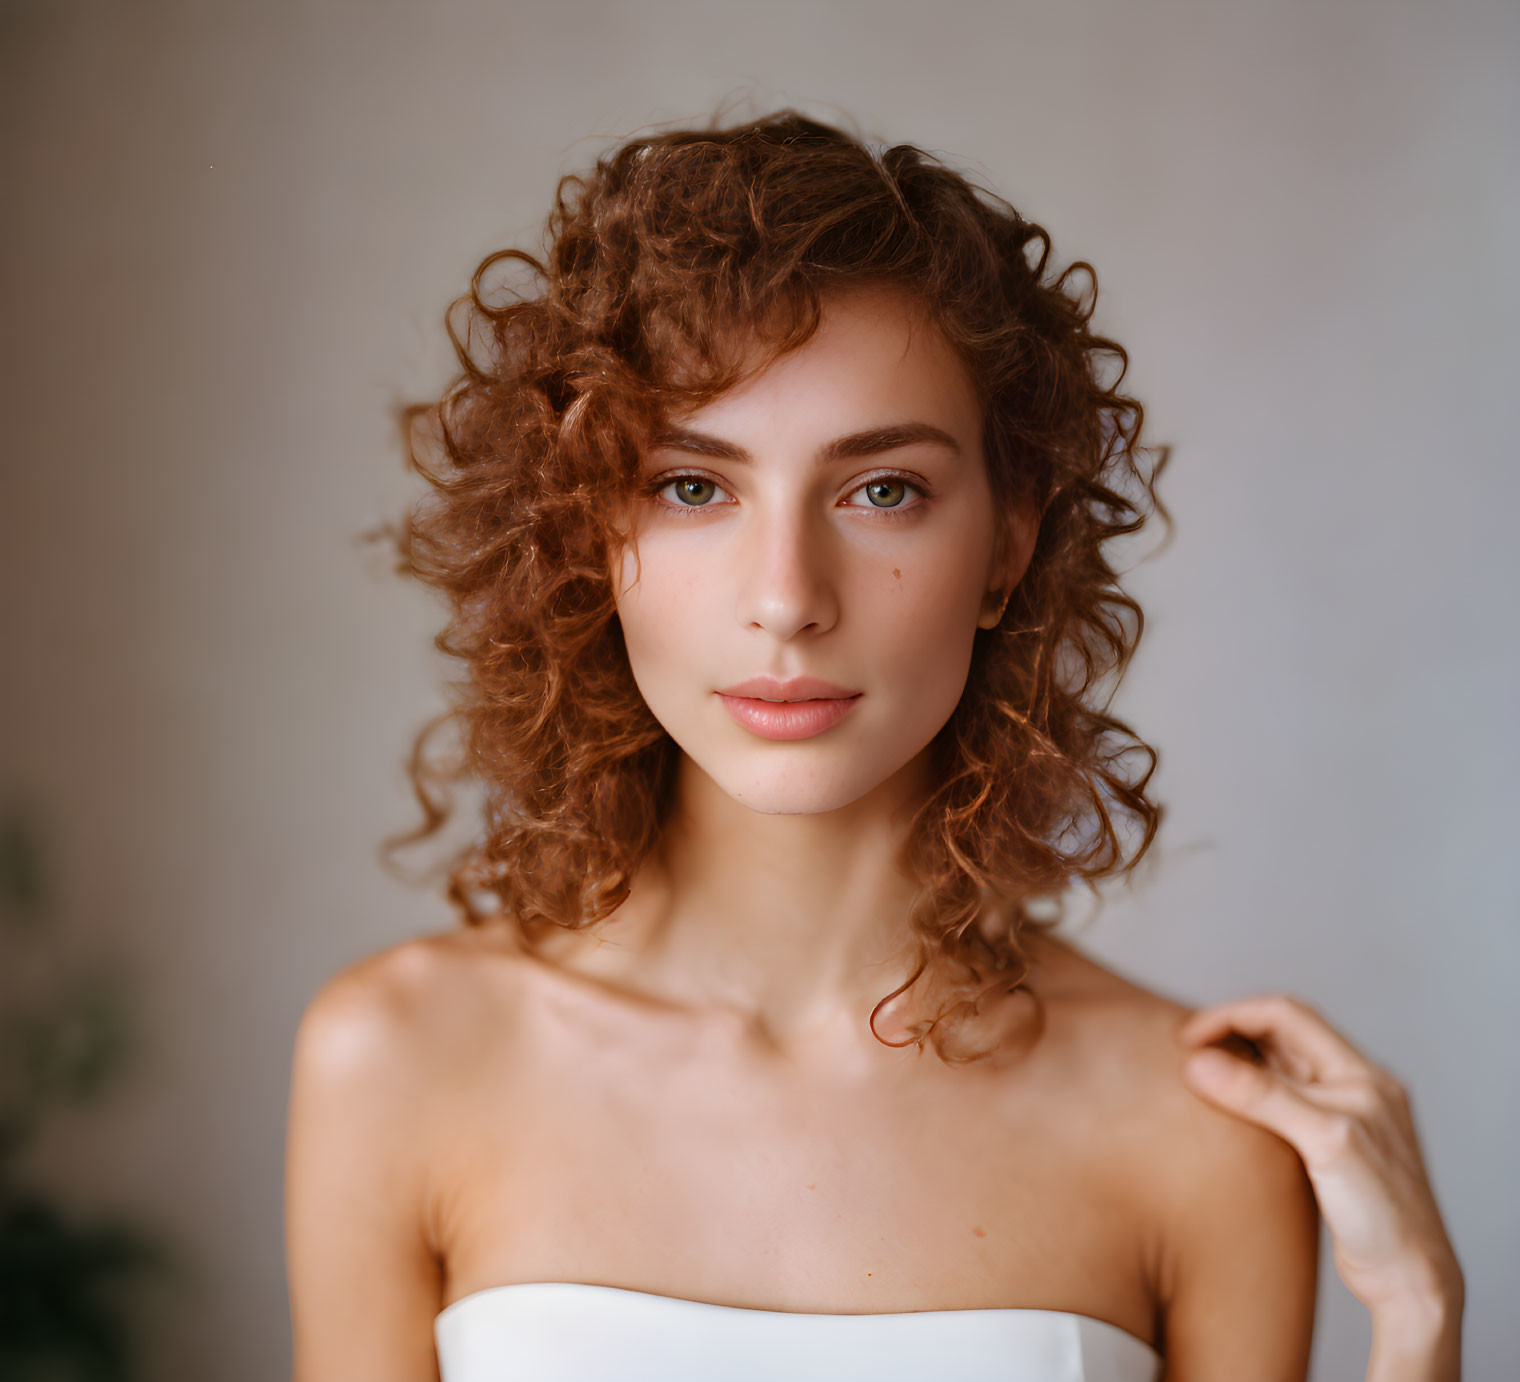 Curly-Haired Youth with Natural Makeup on Neutral Background